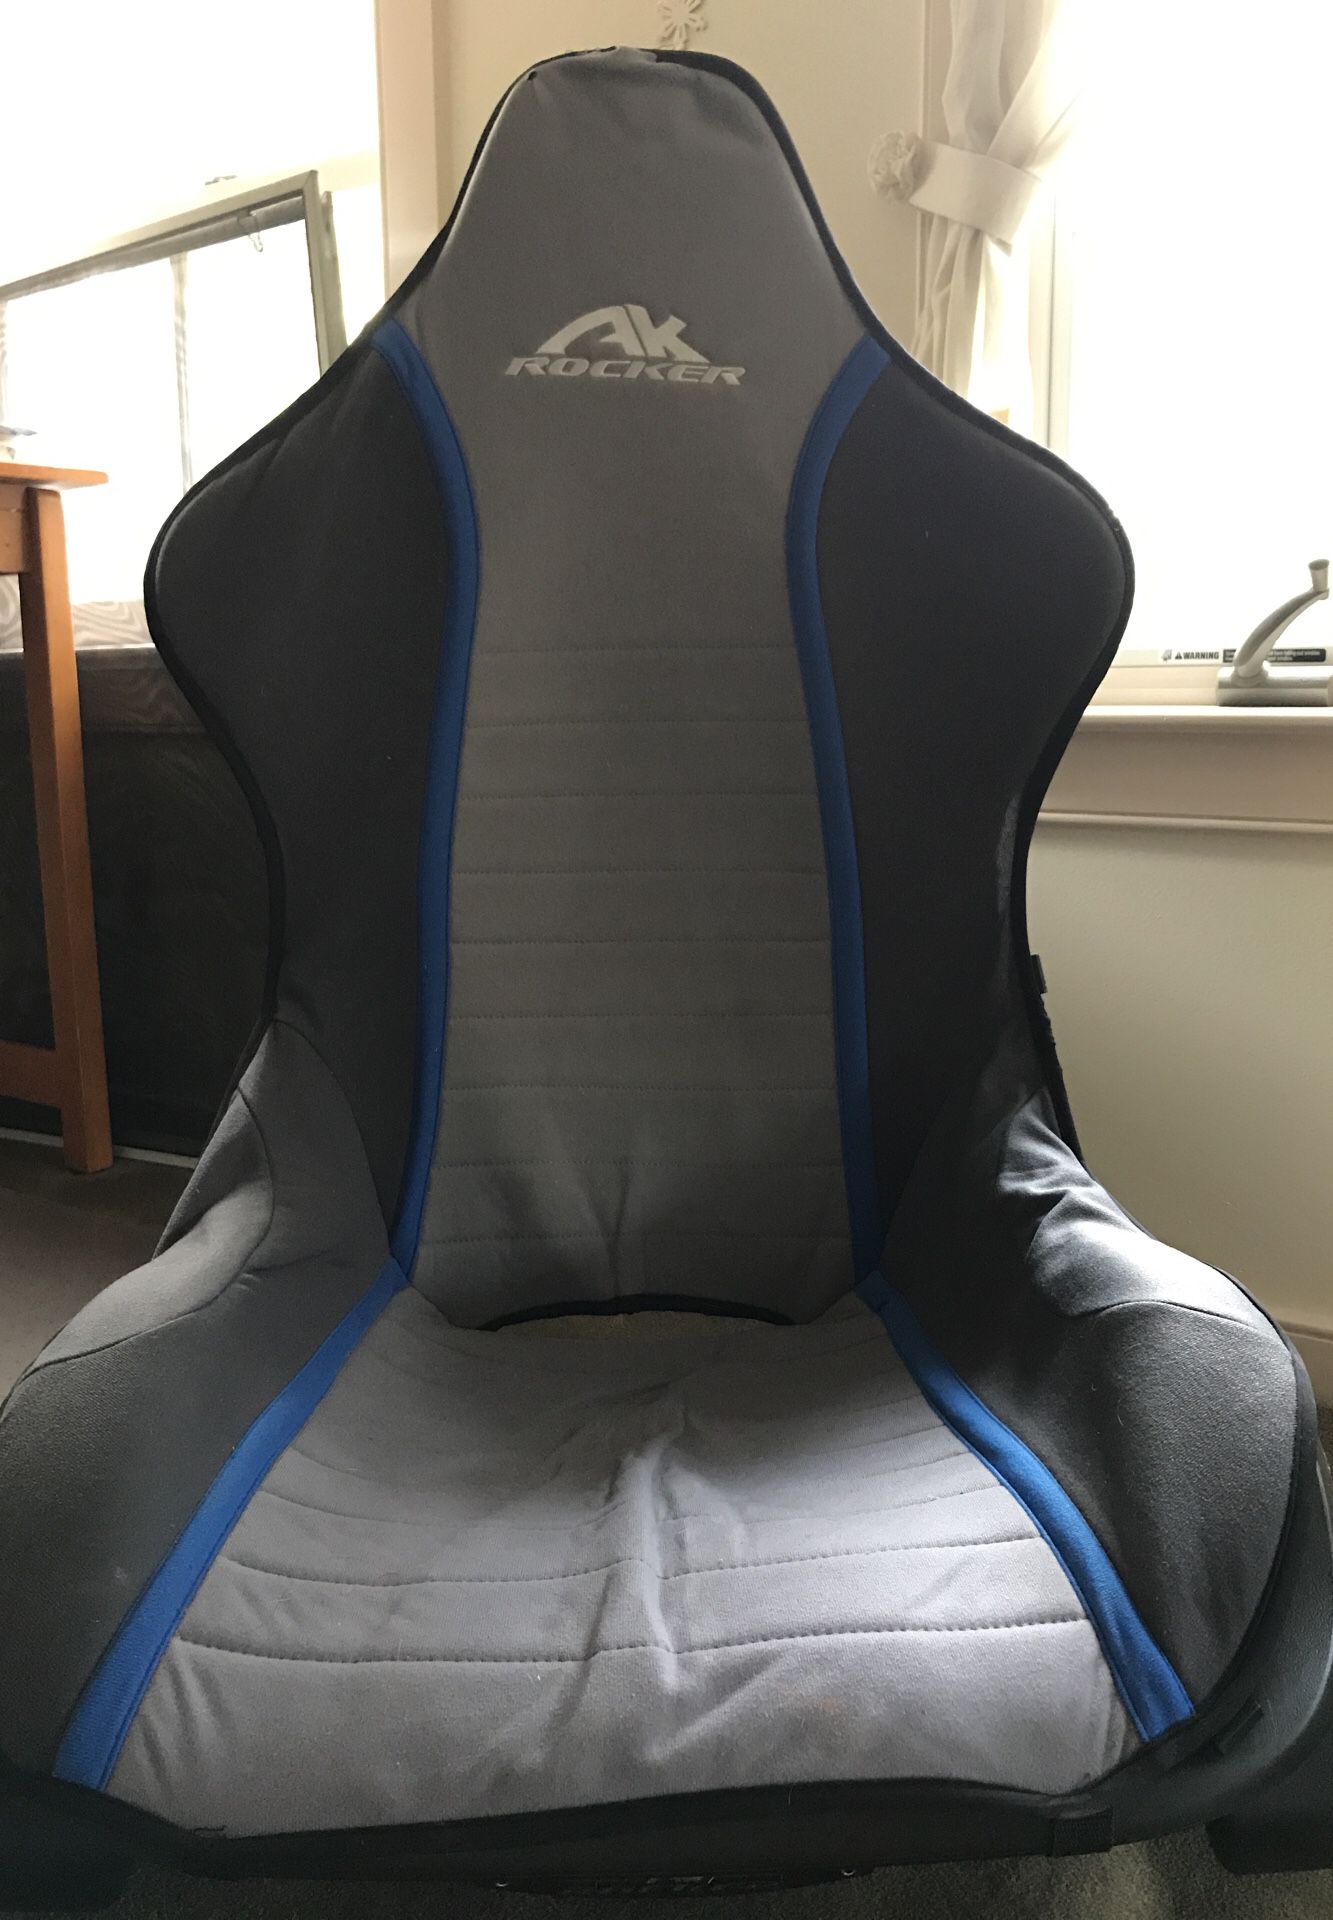 Video game chair